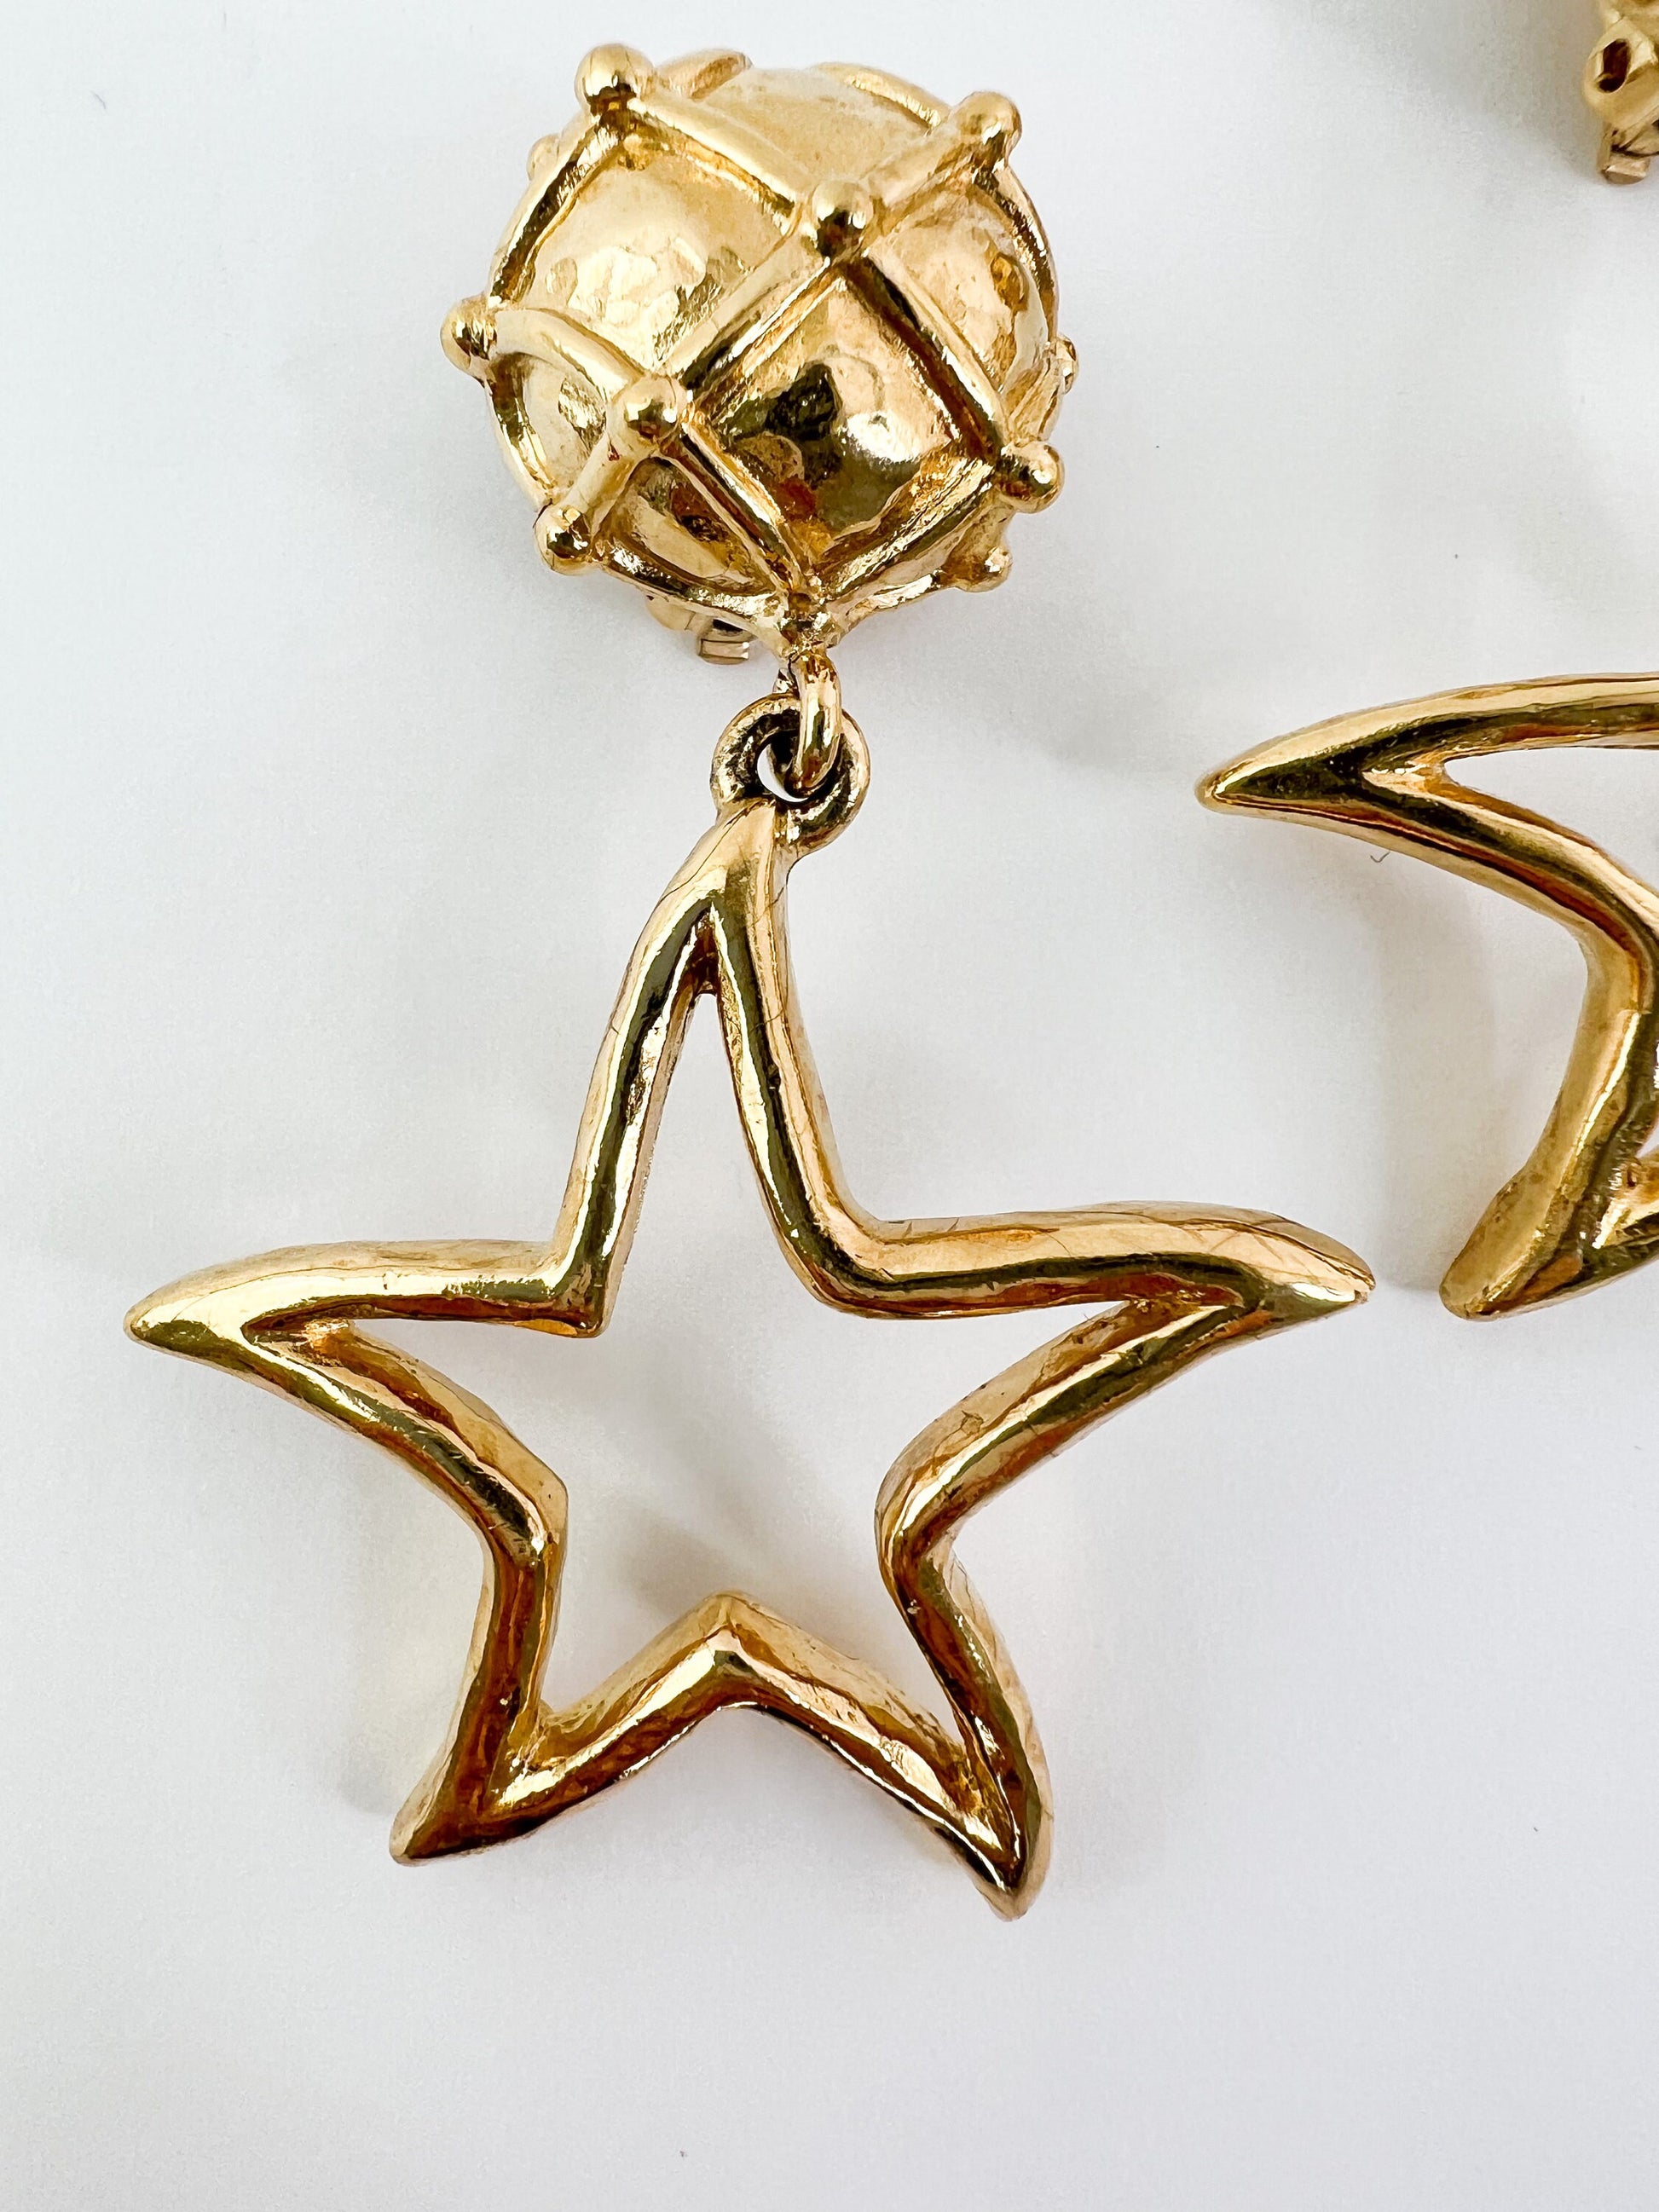 Vintage Givenchy Earrings, Vintage Givenchy Star Earrings, Givenchy dangle earrings , Vintage Givenchy jewelry, Givenchy collectible